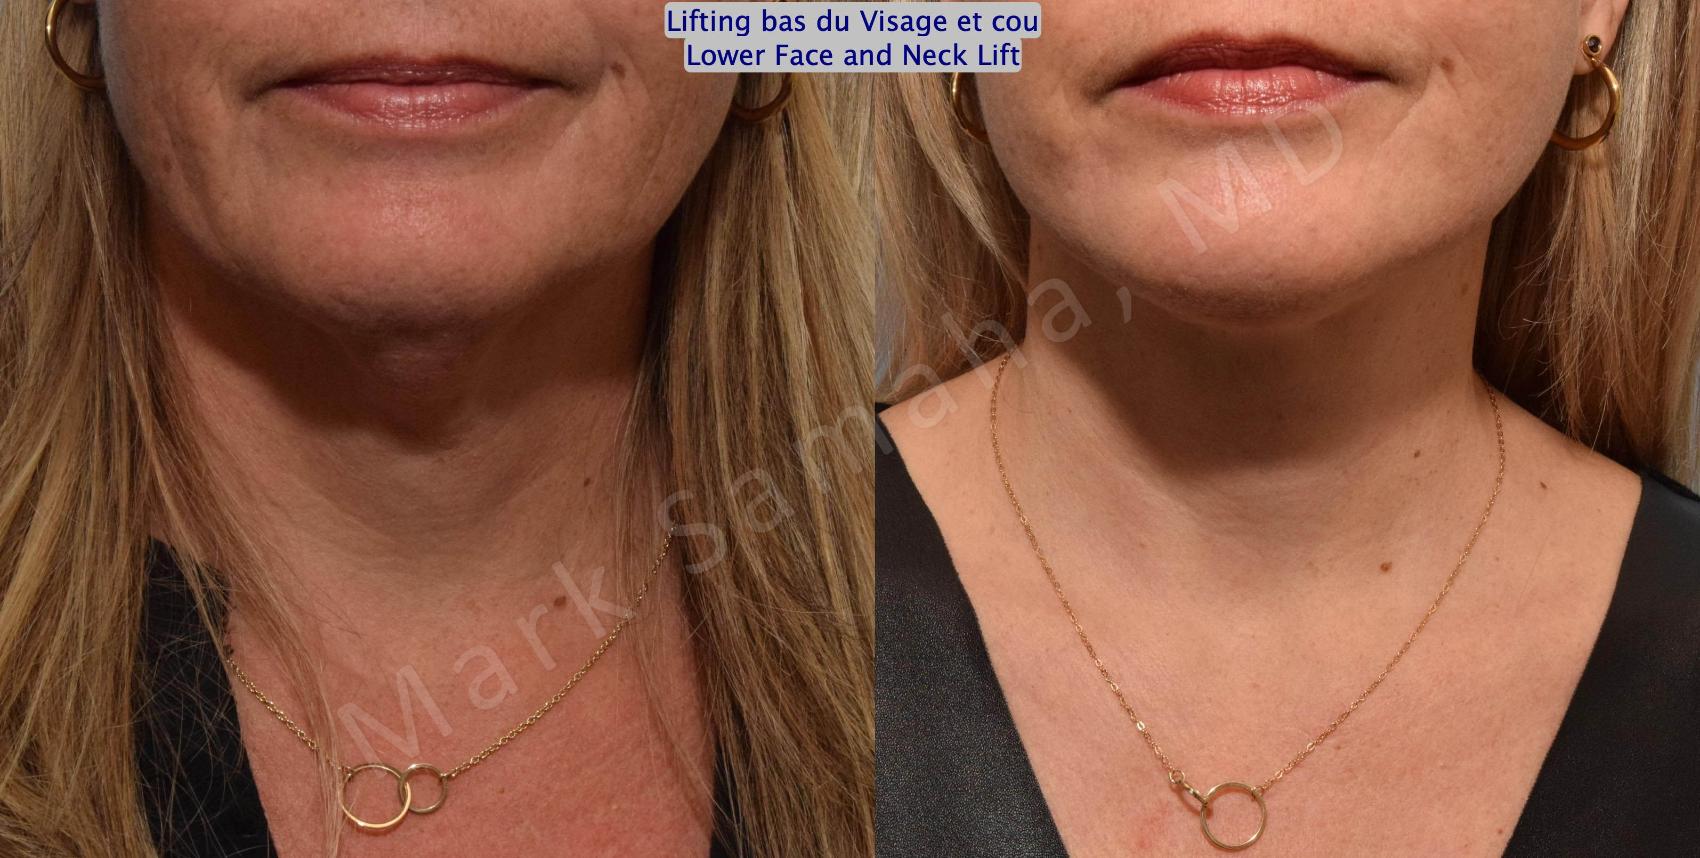 Before & After Lifting du visage / Cou - Facelift / Necklift Case 160 Frontal Neck / Cou View in Montreal, QC